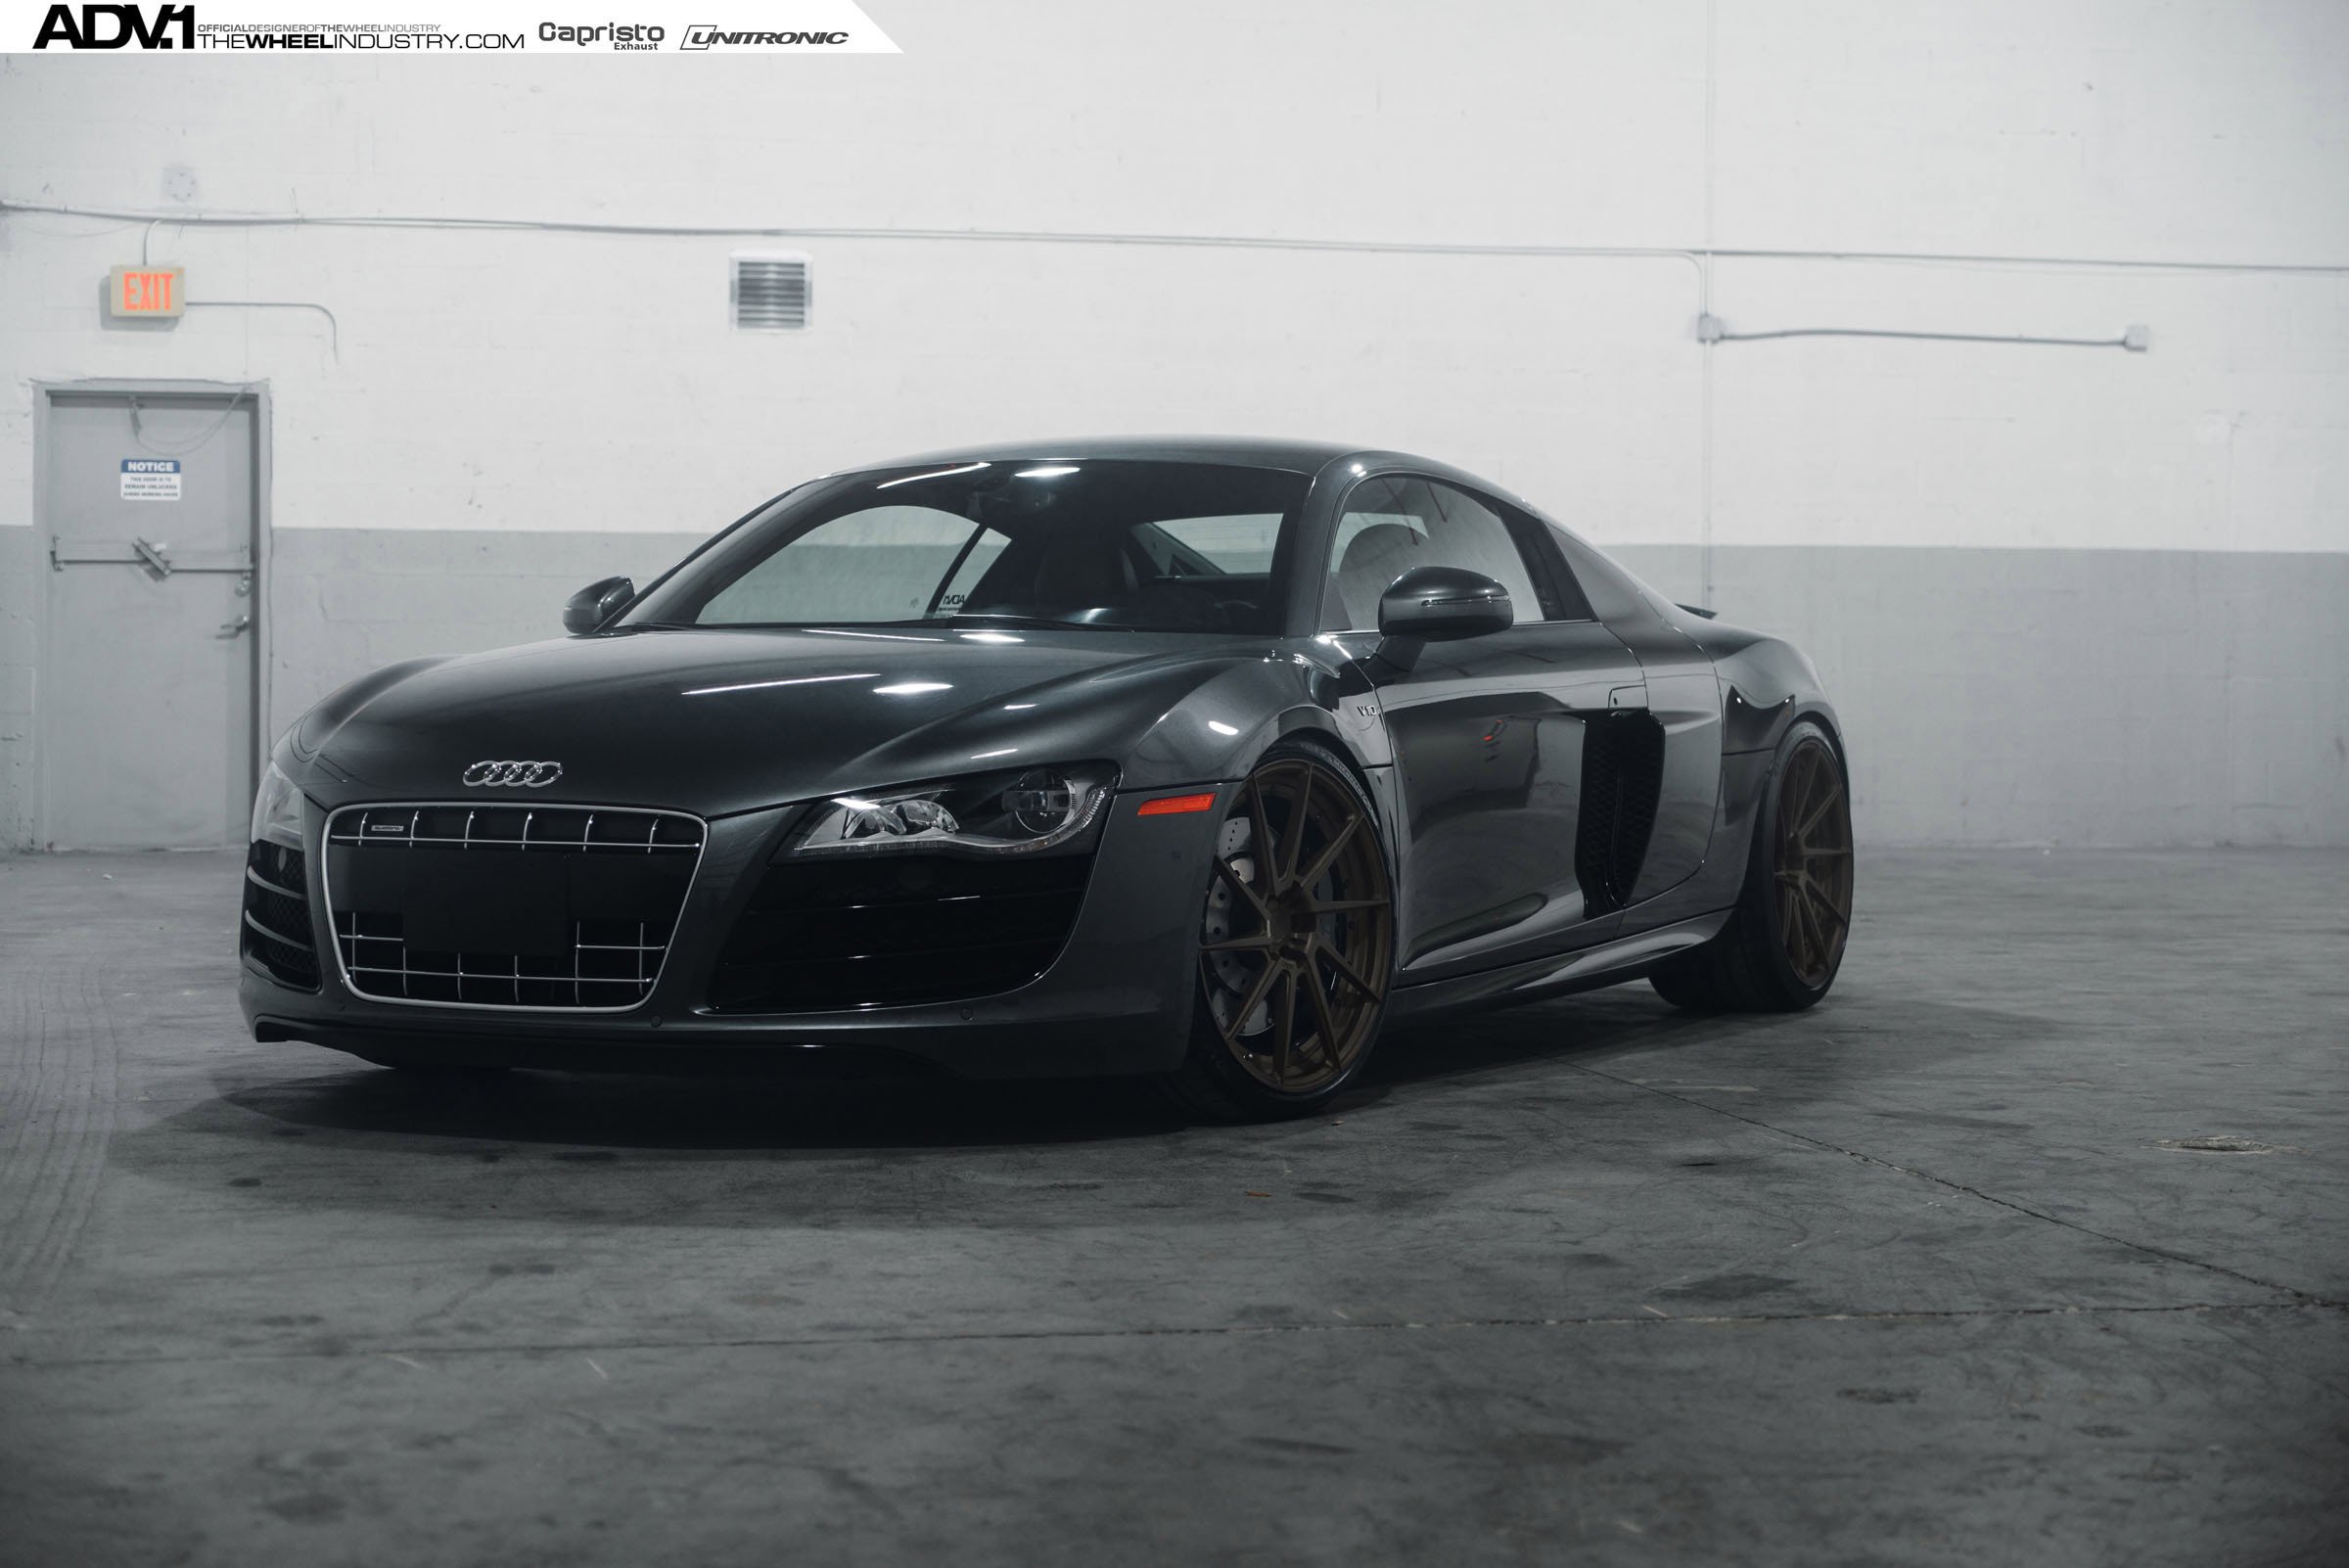 adv, 1, Wheels, Gallery, Audi r8, Coupe, Cars, Supercars, Tuning Wallpaper